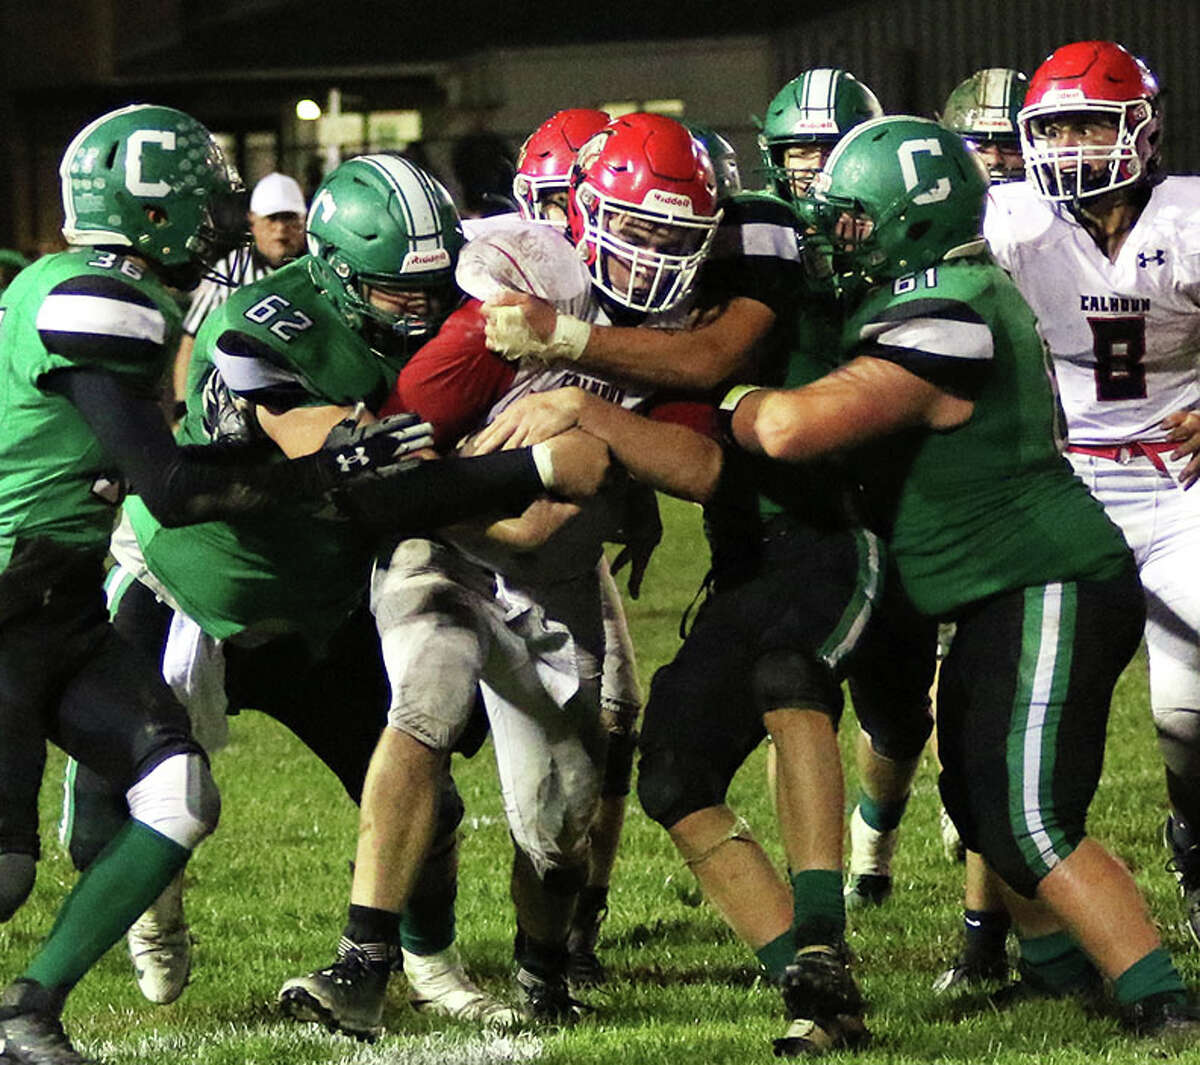 Calhoun's Conner Longnecker (middle) scored on a 54-yard touchdown run Friday, but the Warriors fell to Beardstown 36-11. Longnecker is shown in previous action against Carrollton.